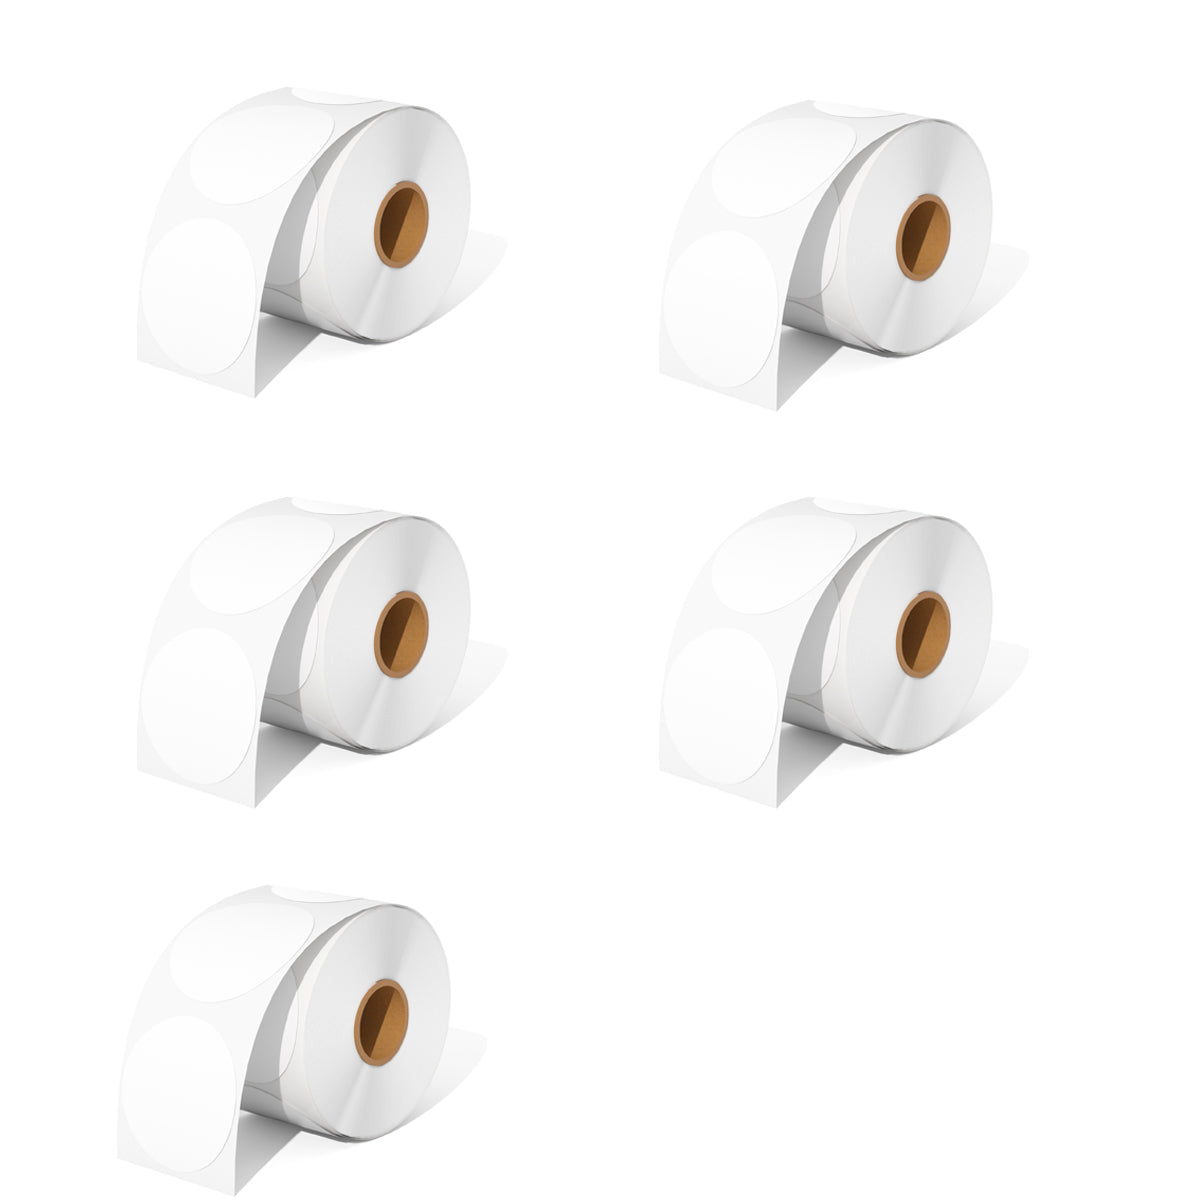 We offer five rolls of white direct thermal round labels as a kit, with 750 labels per roll.